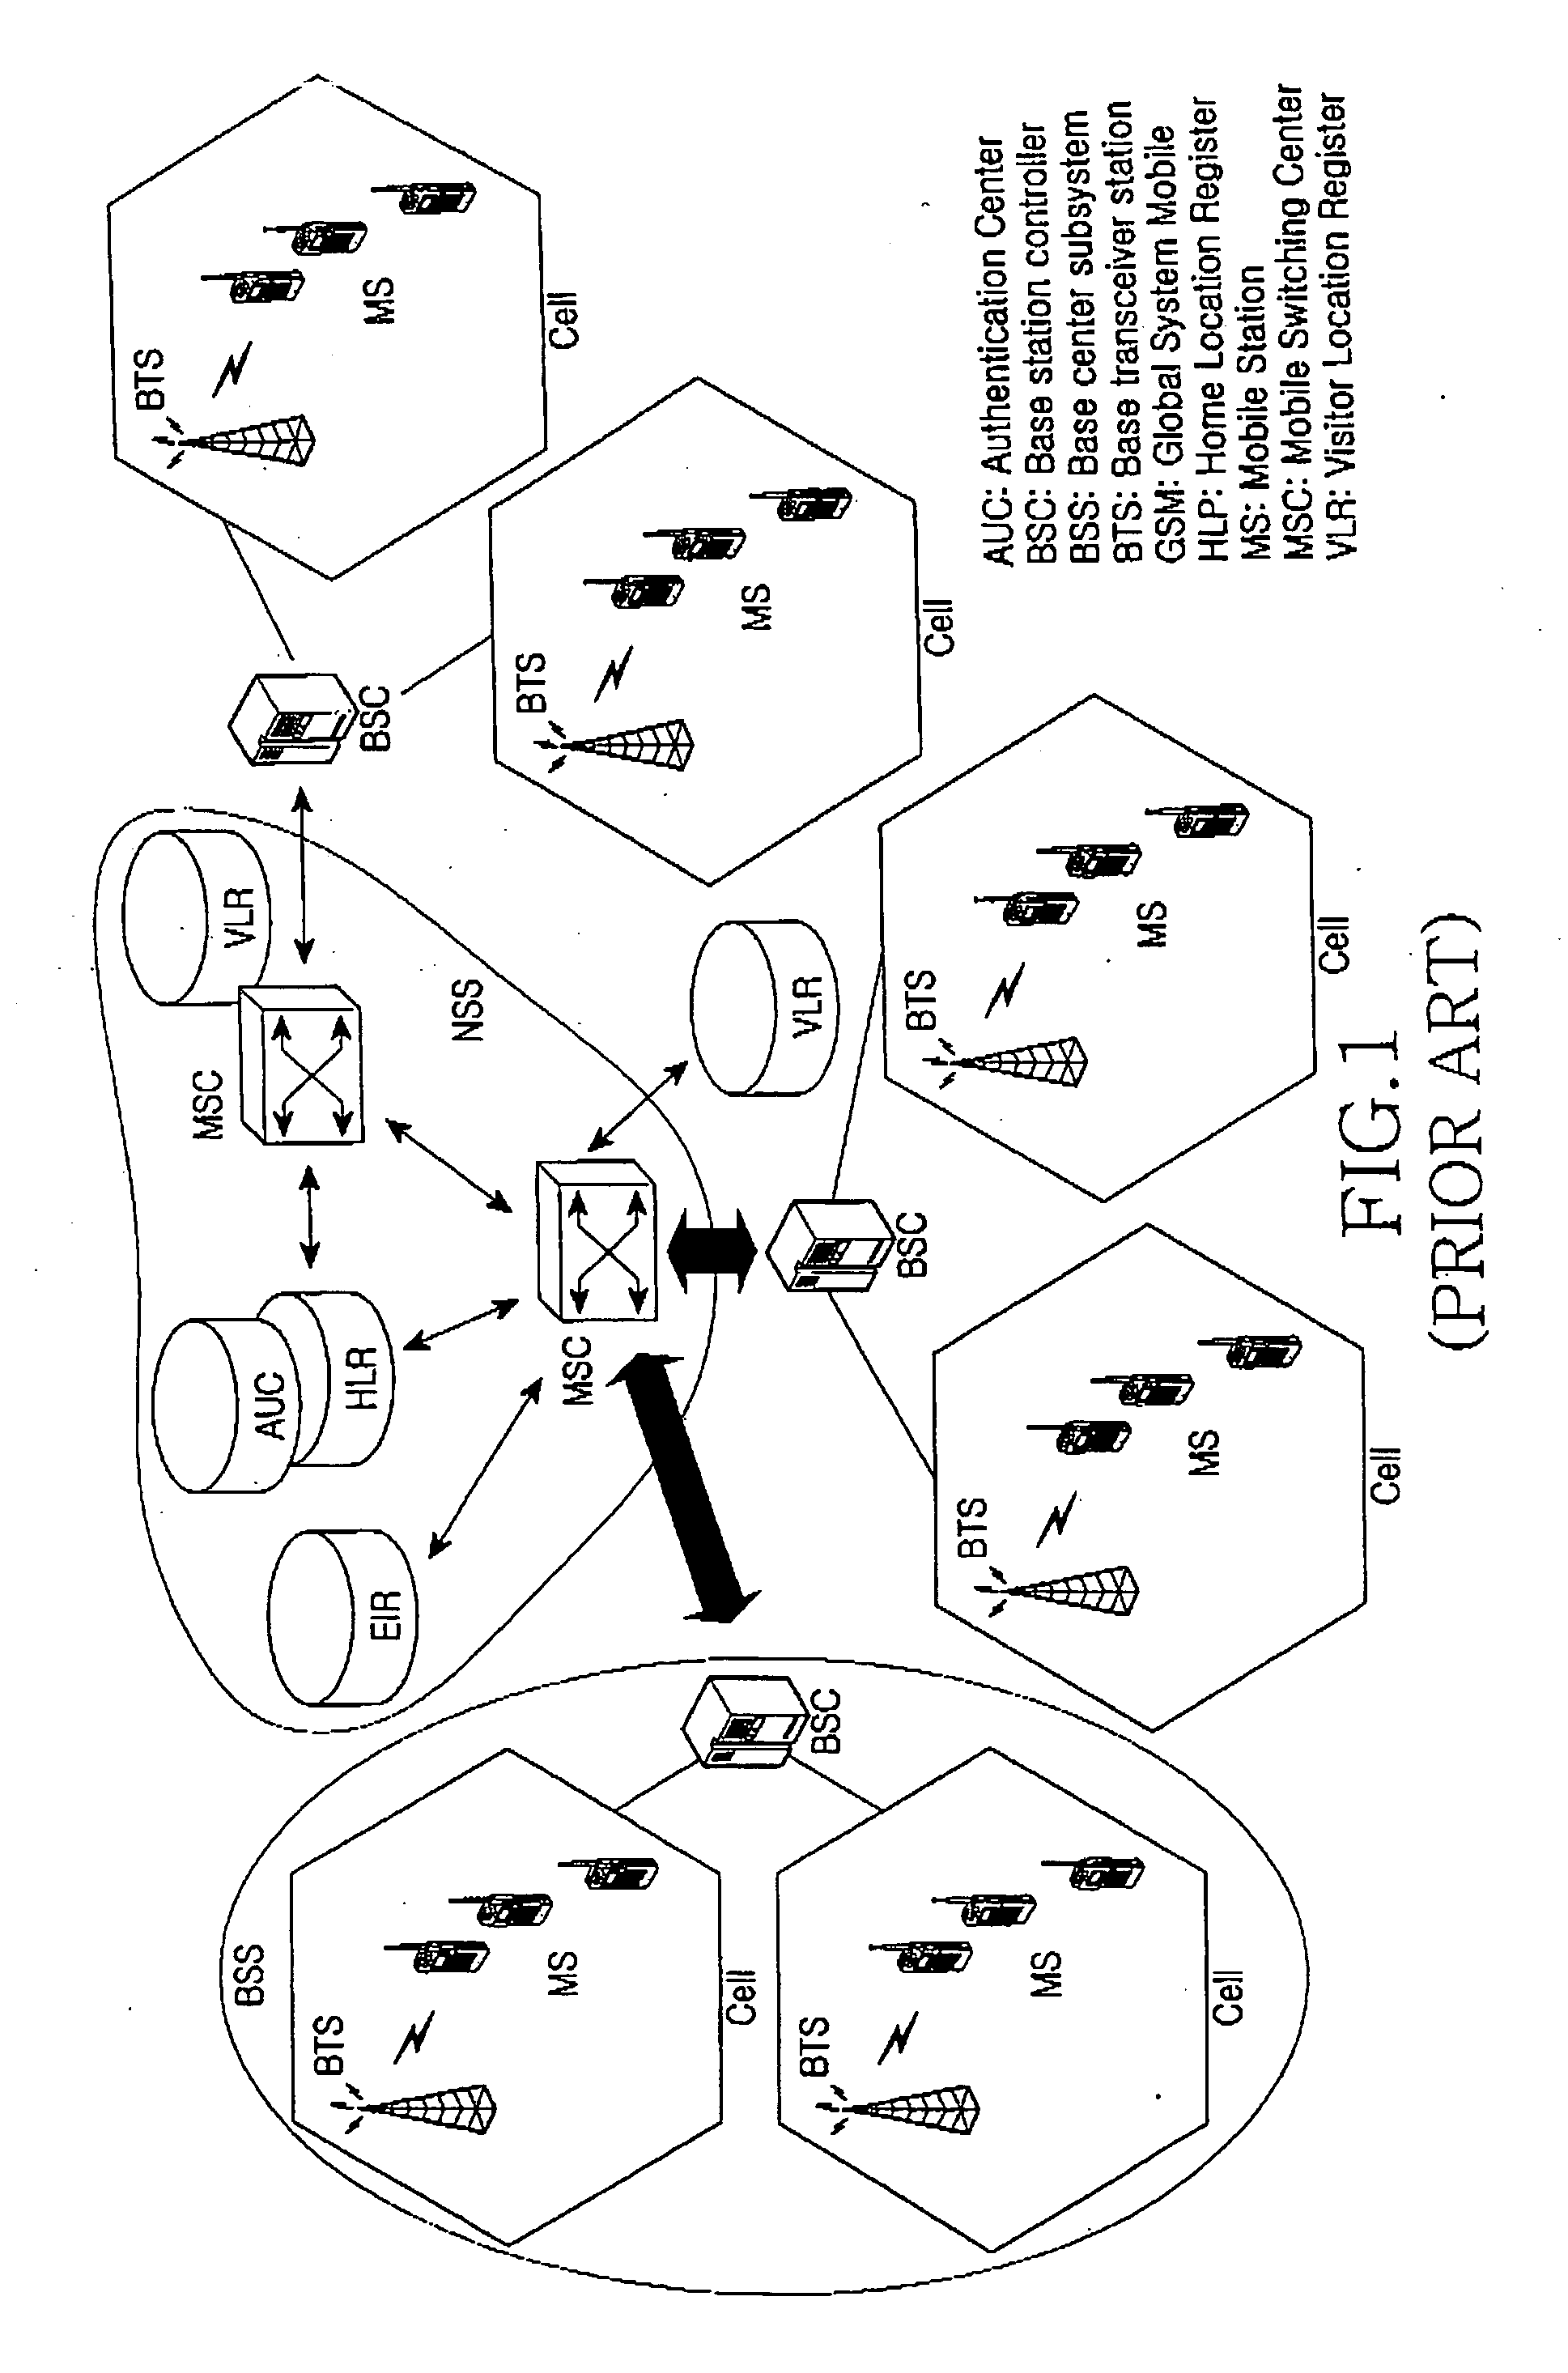 System for improving overall battery life of a GSM communication device